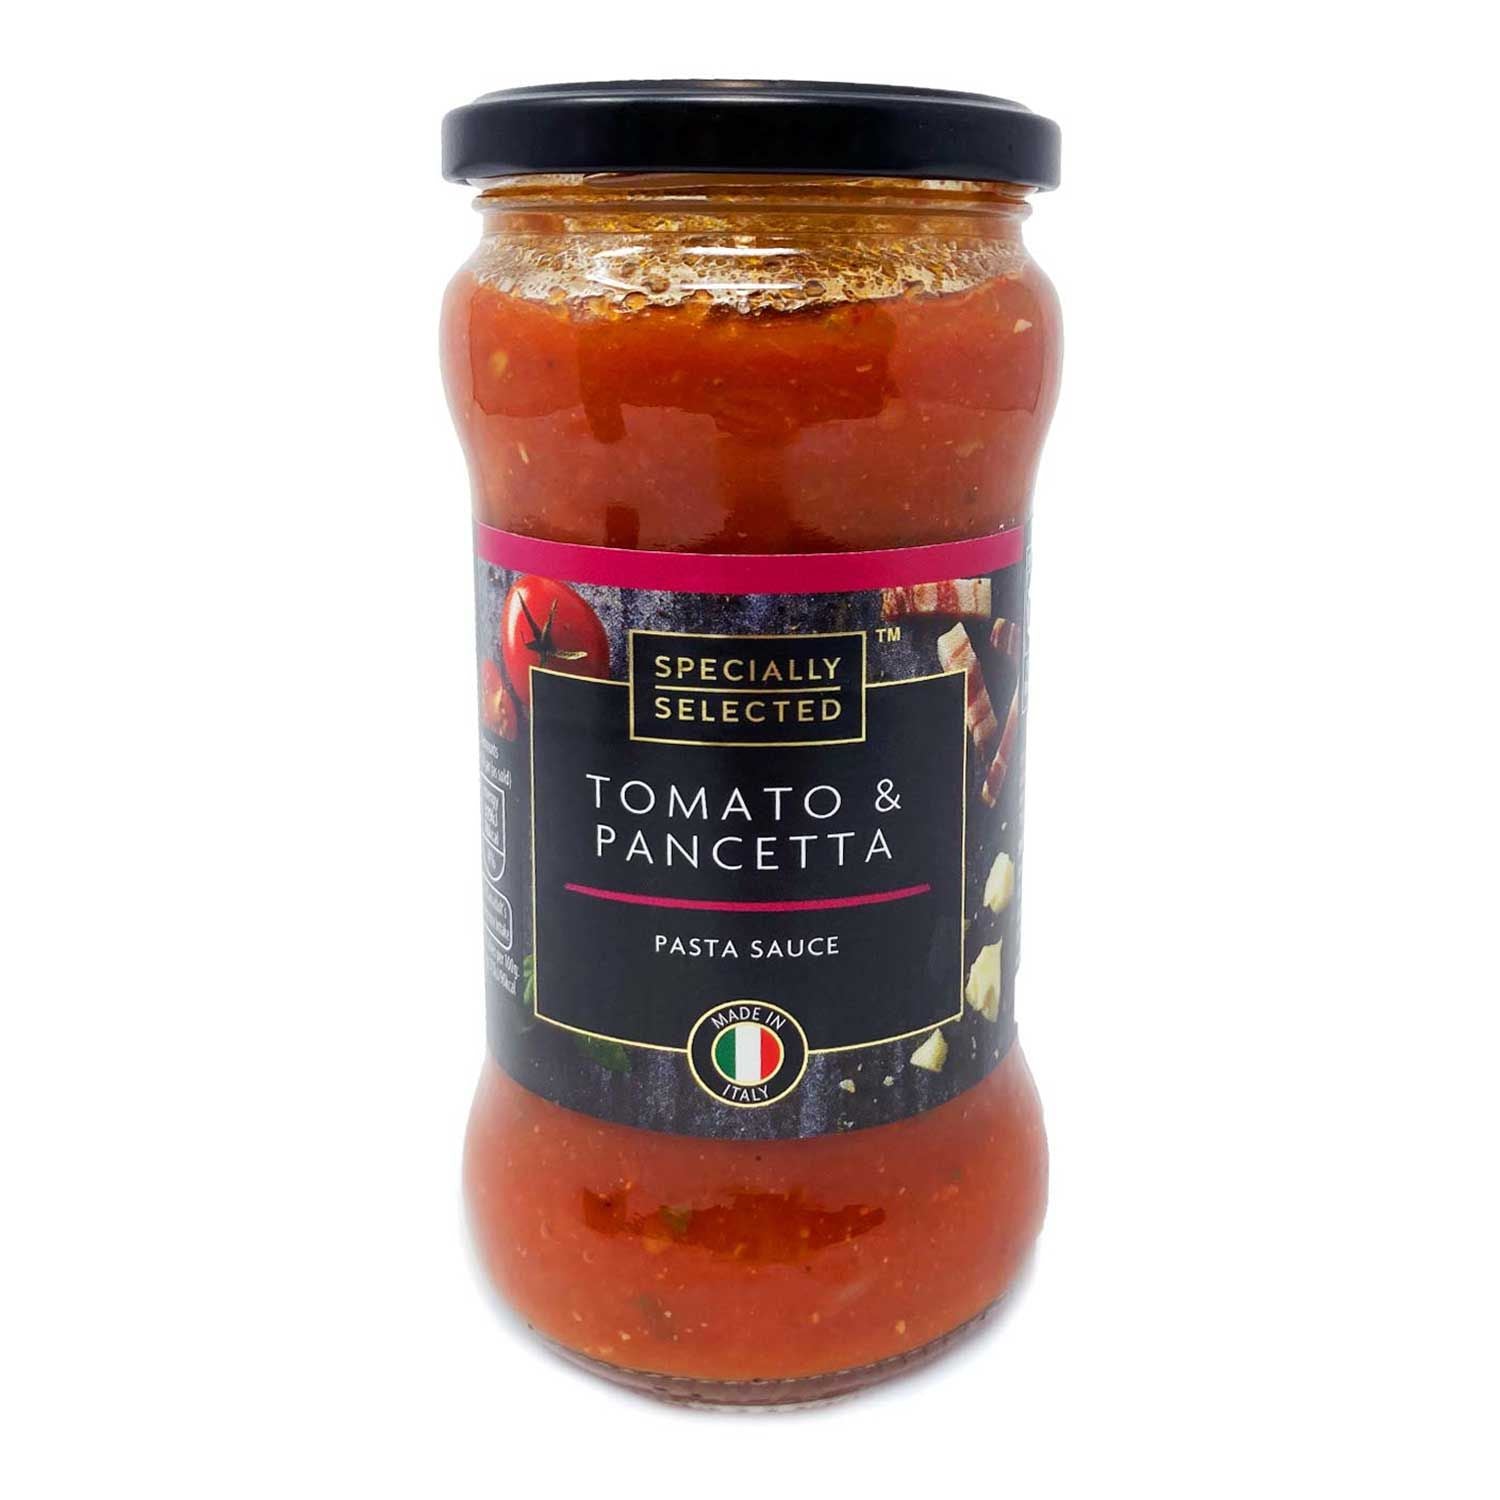 Specially Selected Tomato & Pancetta Pasta Sauce 340g (2 Pack)